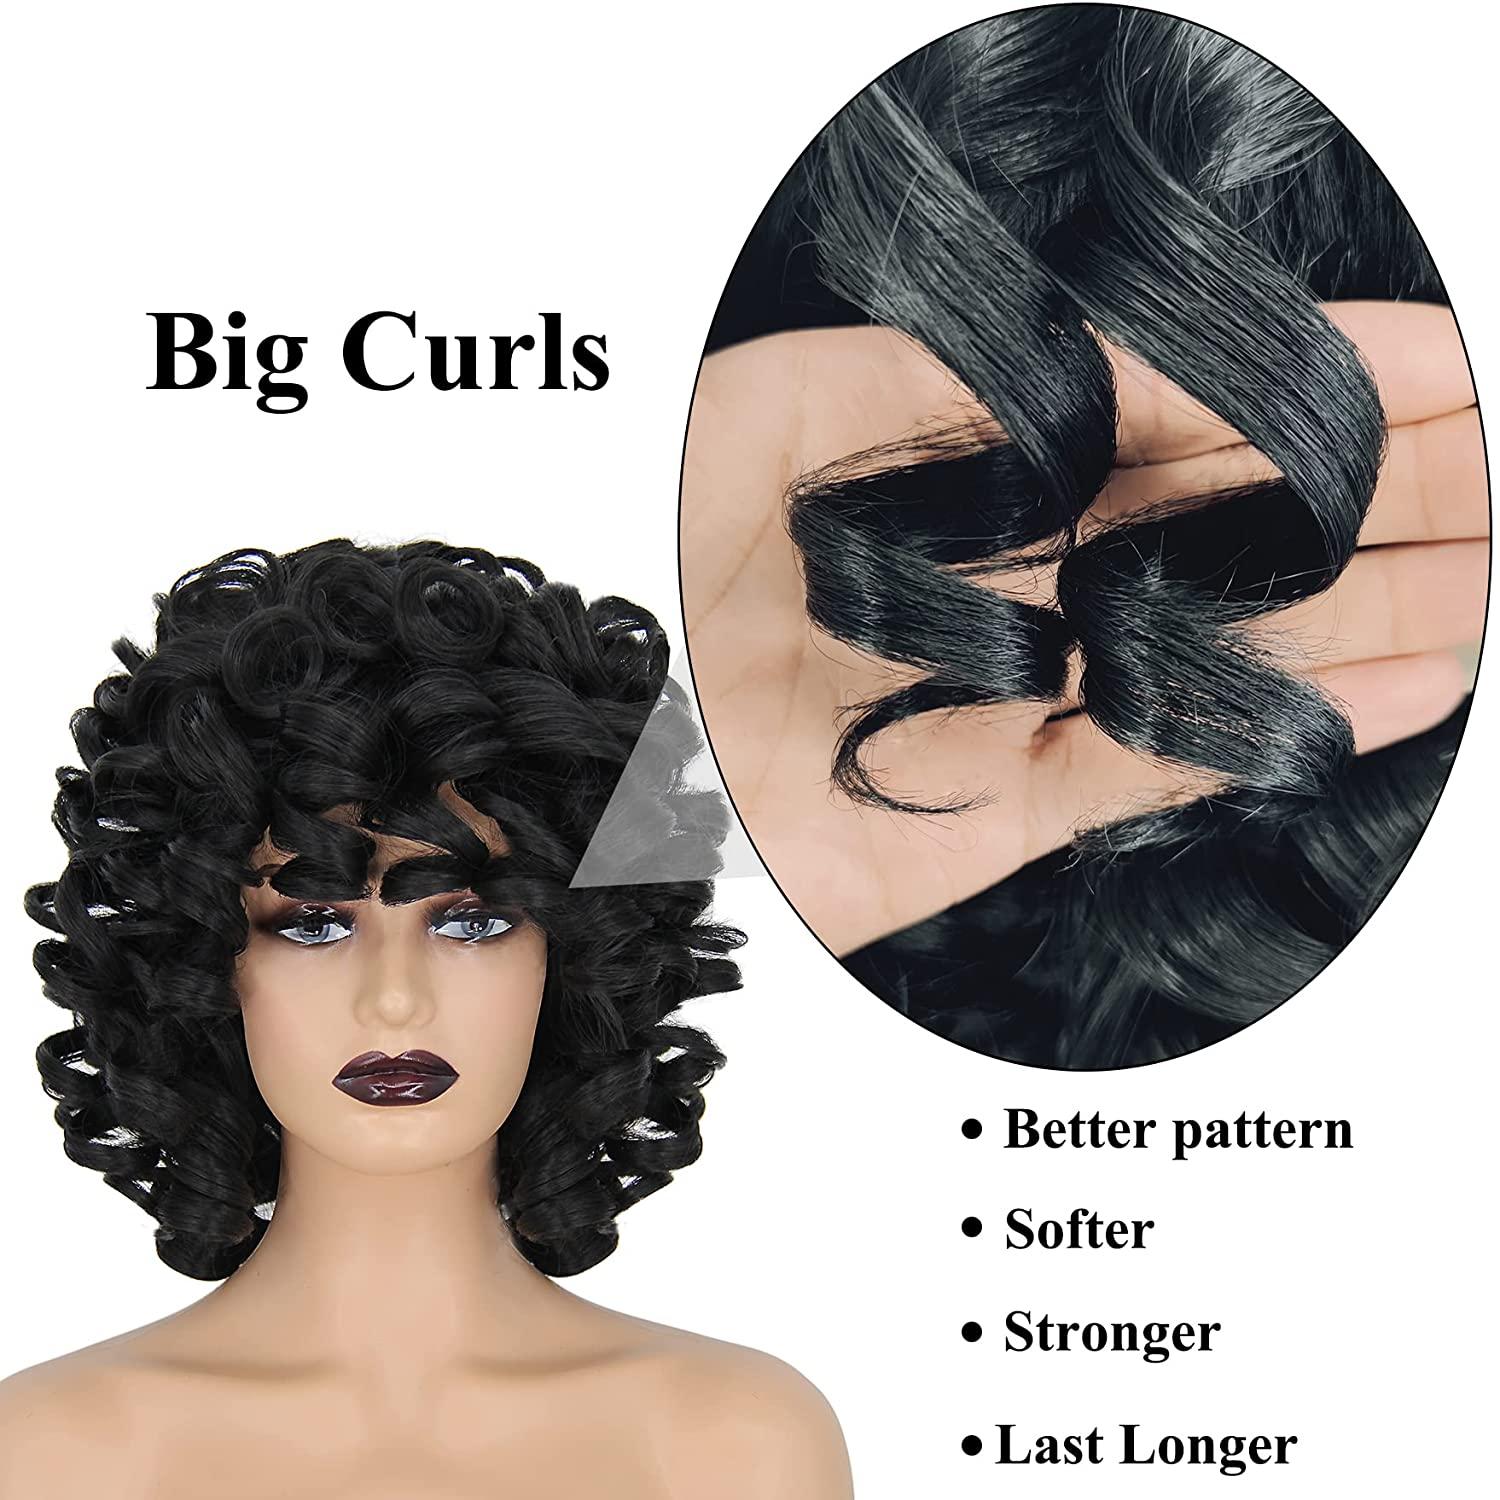 FOVER Short Curly Wigs for Black Women 14'' Black Big Curly Wig with Bangs  Afro Kinky Soft Curls Hair Replacement Wig Heat Resistant Natural Looking  Synthetic Wig (Big Curly) FE013BK 14 Inch